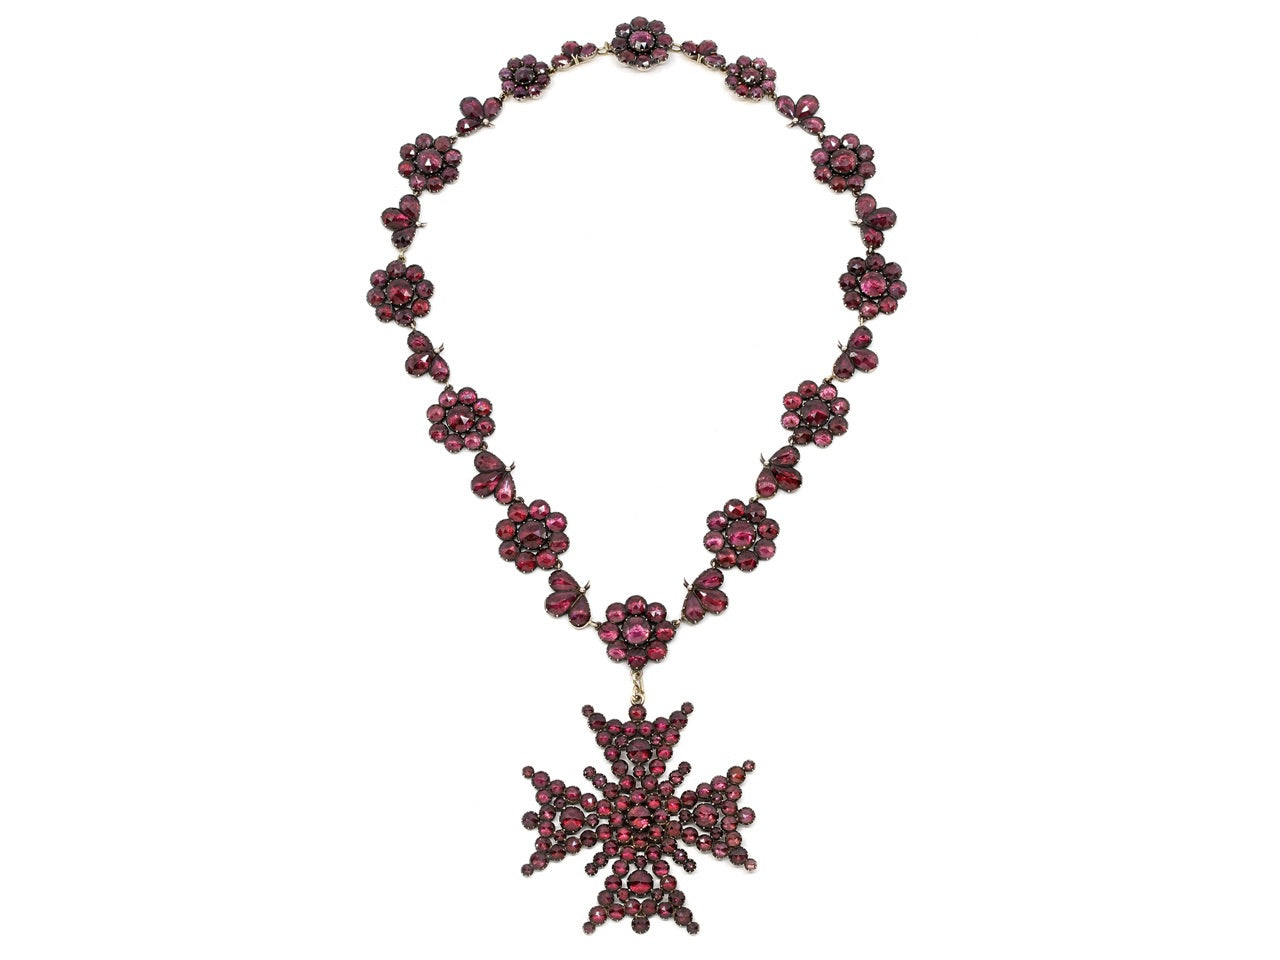 Antique Georgian Foiled Garnet Necklace with Detachable Cross in 14K Gold